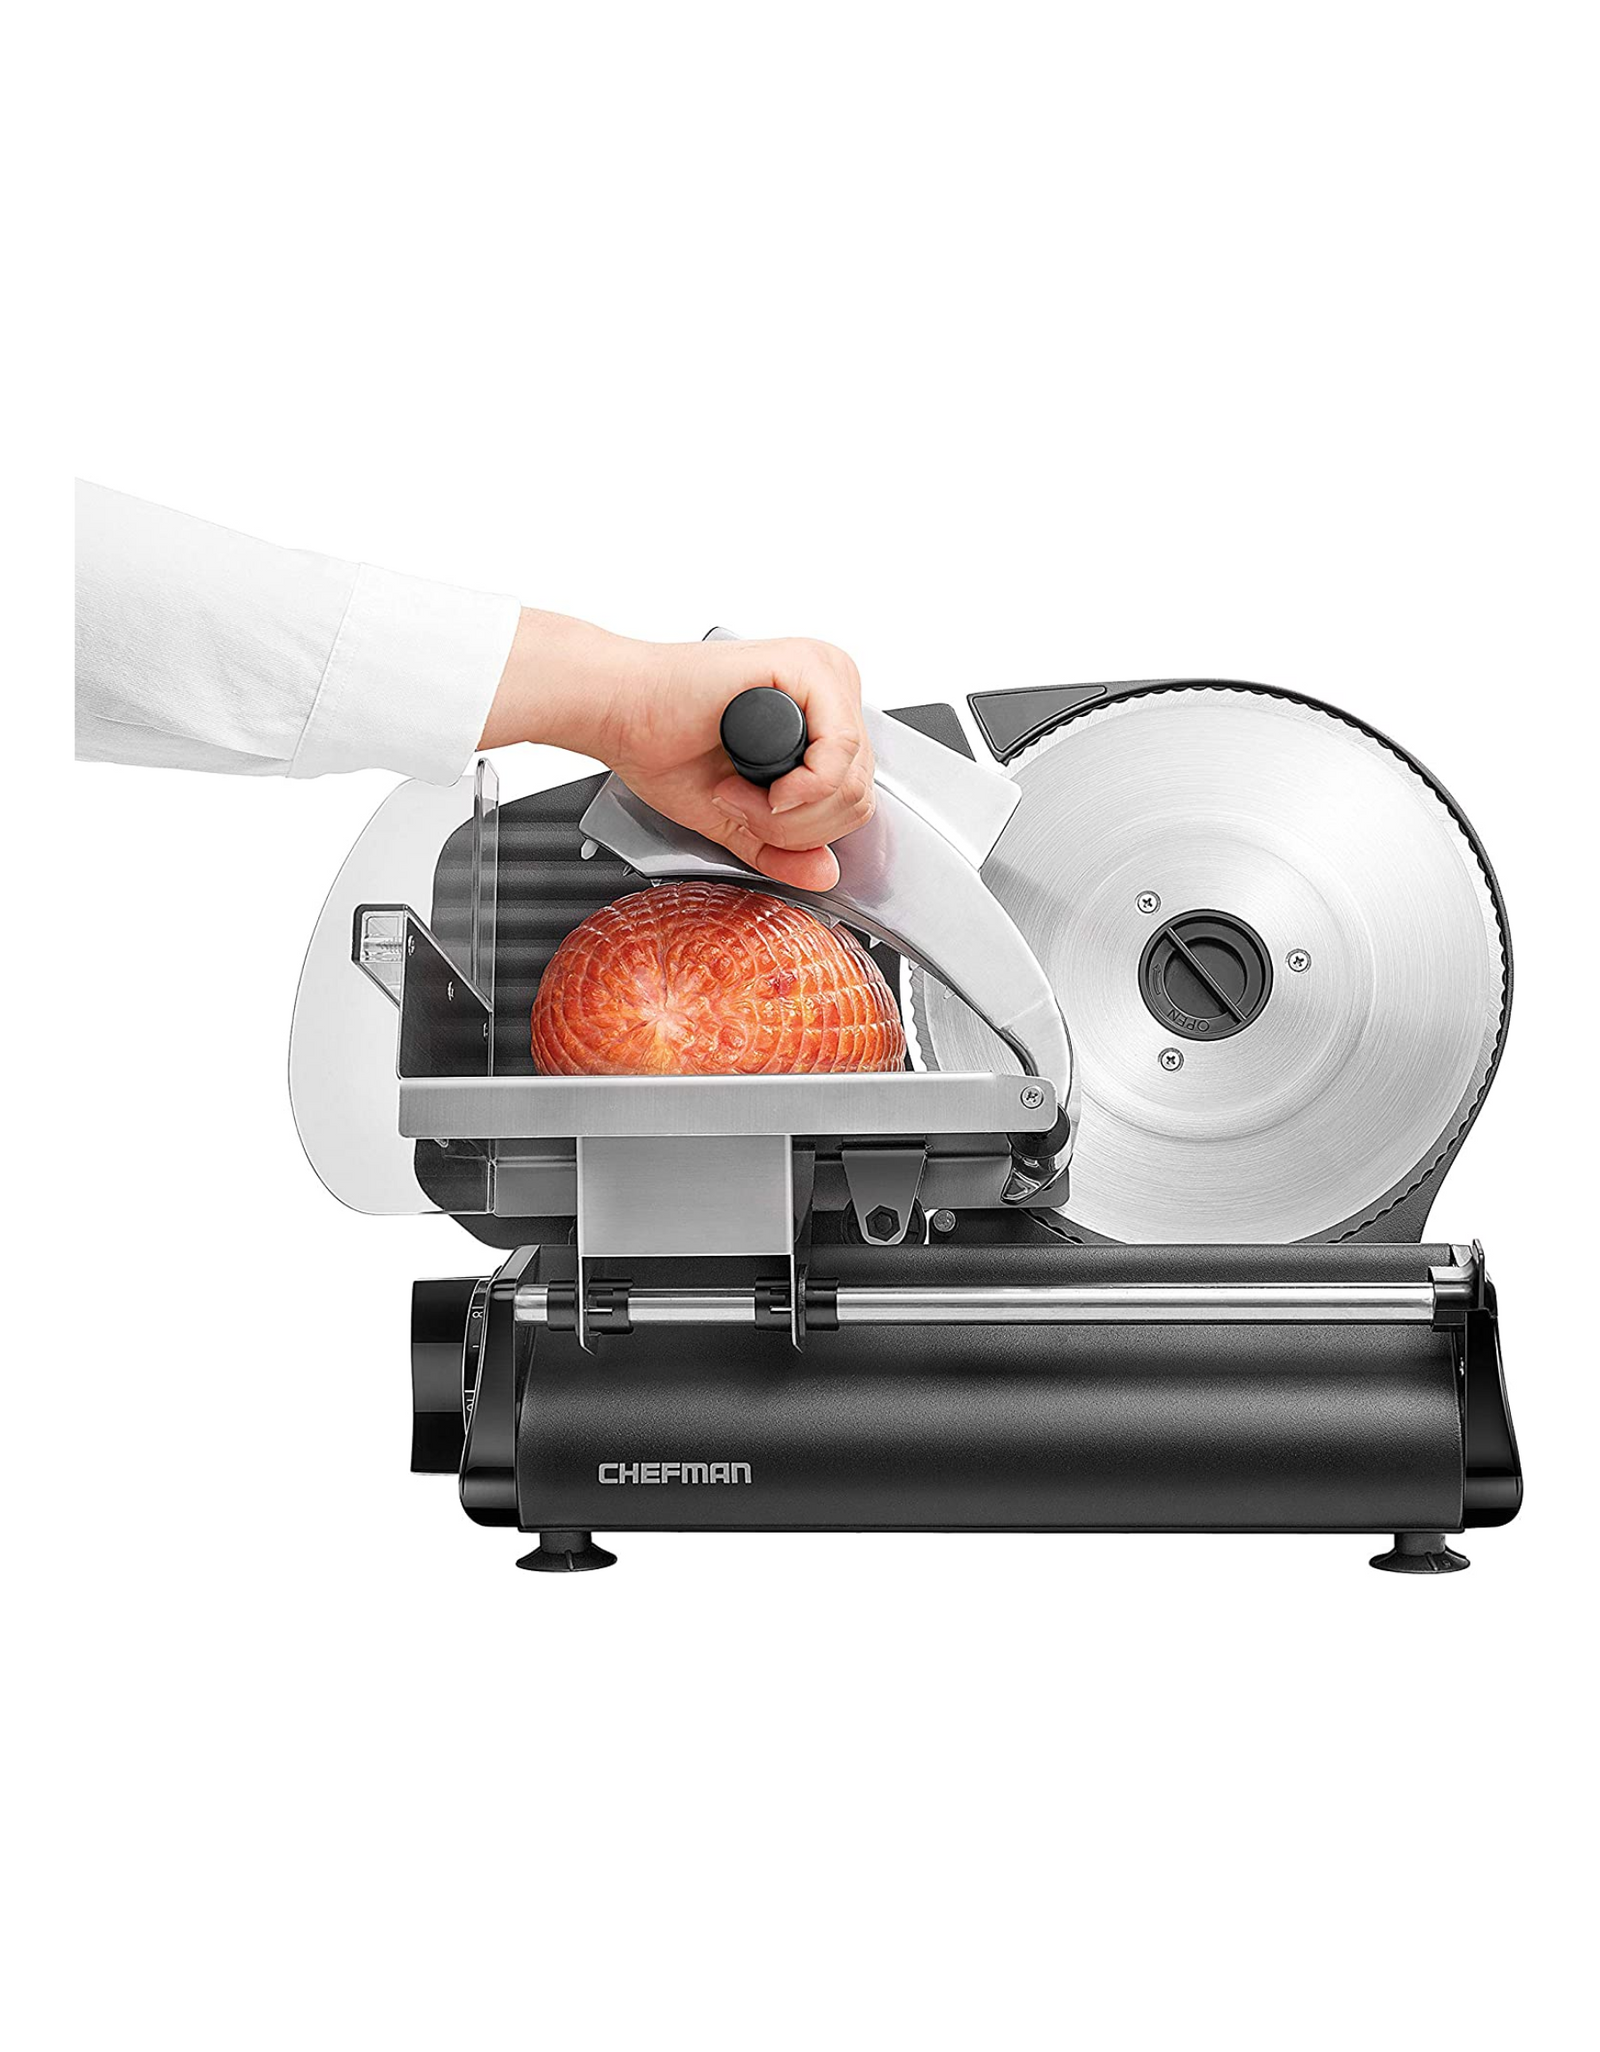 Chefman Electric Deli & Food Slicer Die-Cast Machine, Use to Slice Meat, Cheese, Bread, Fruit & Vegetables, Black/Stainless